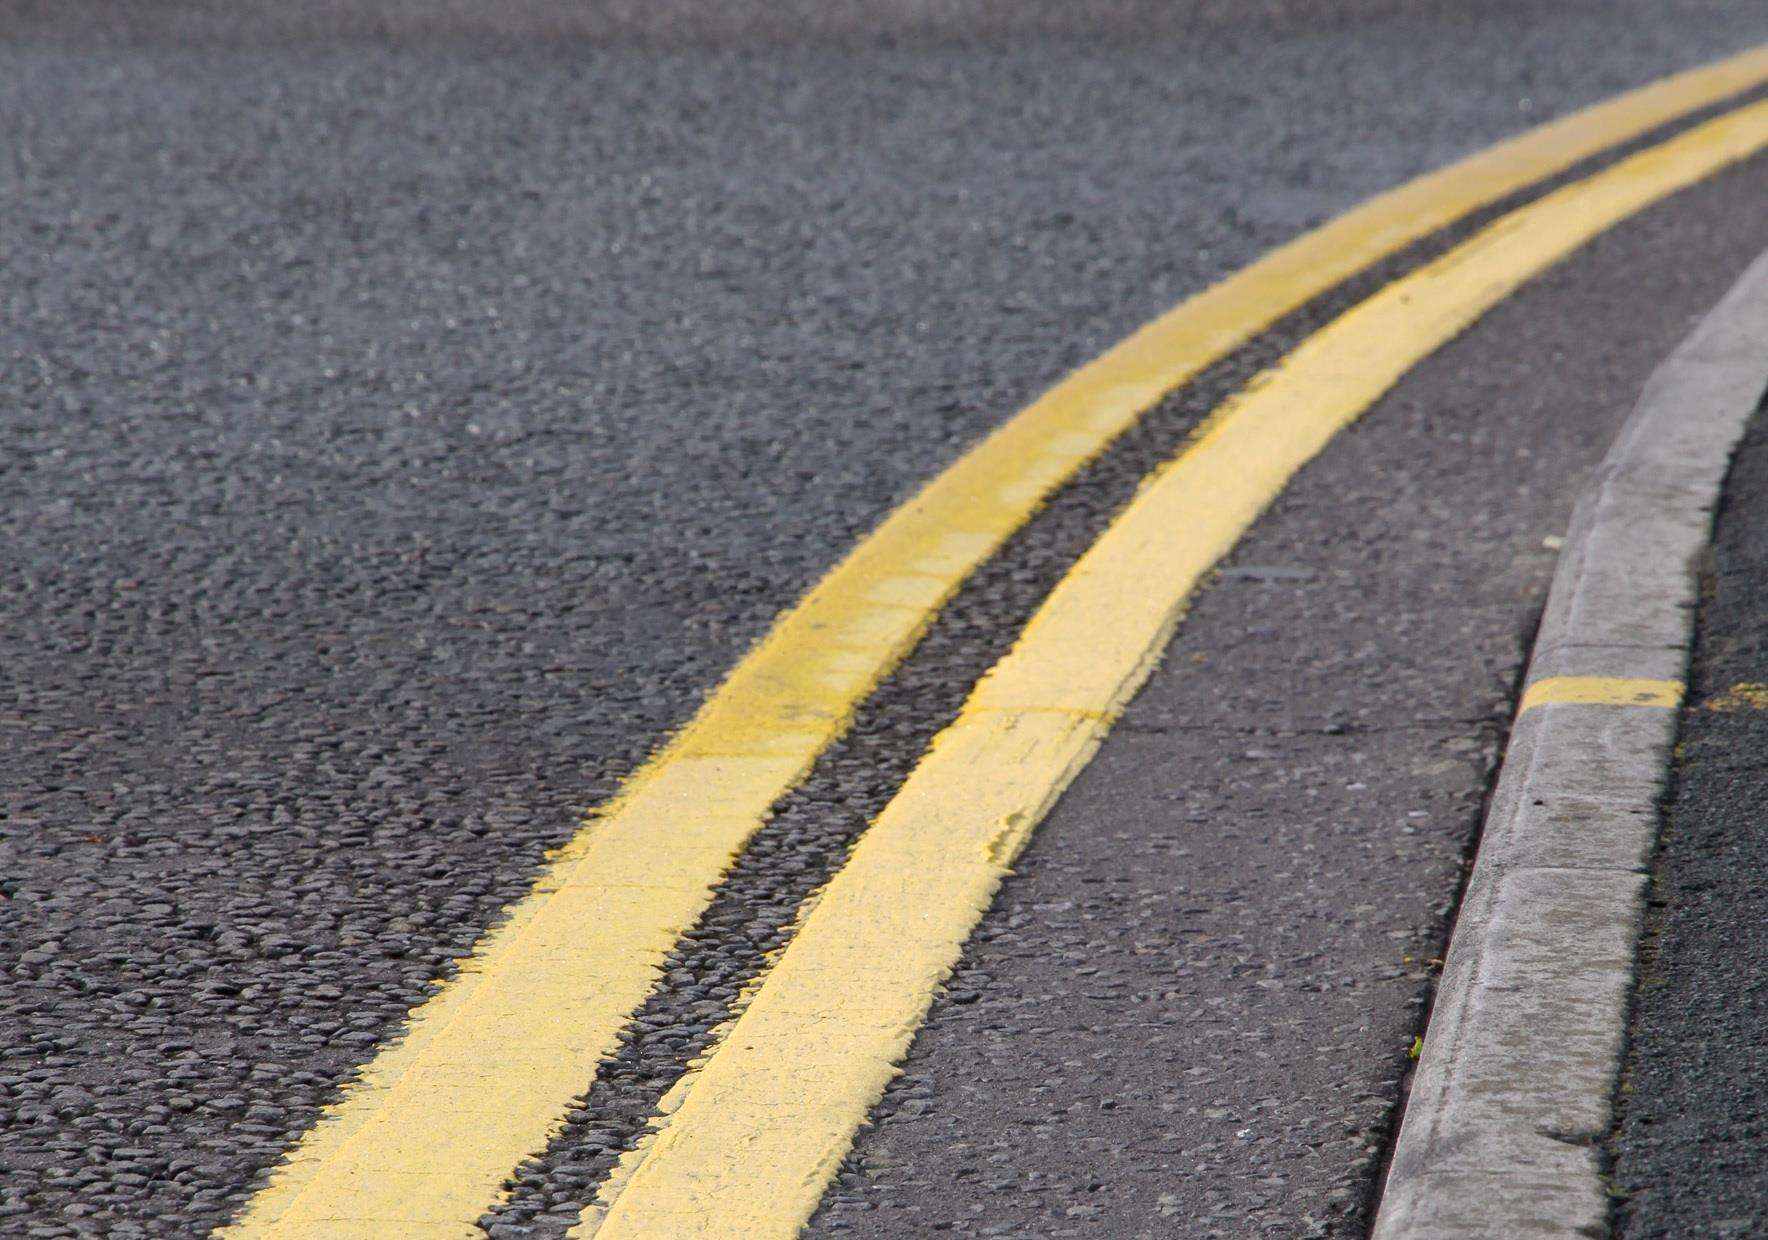 Parking on yellow lines was the most common offence